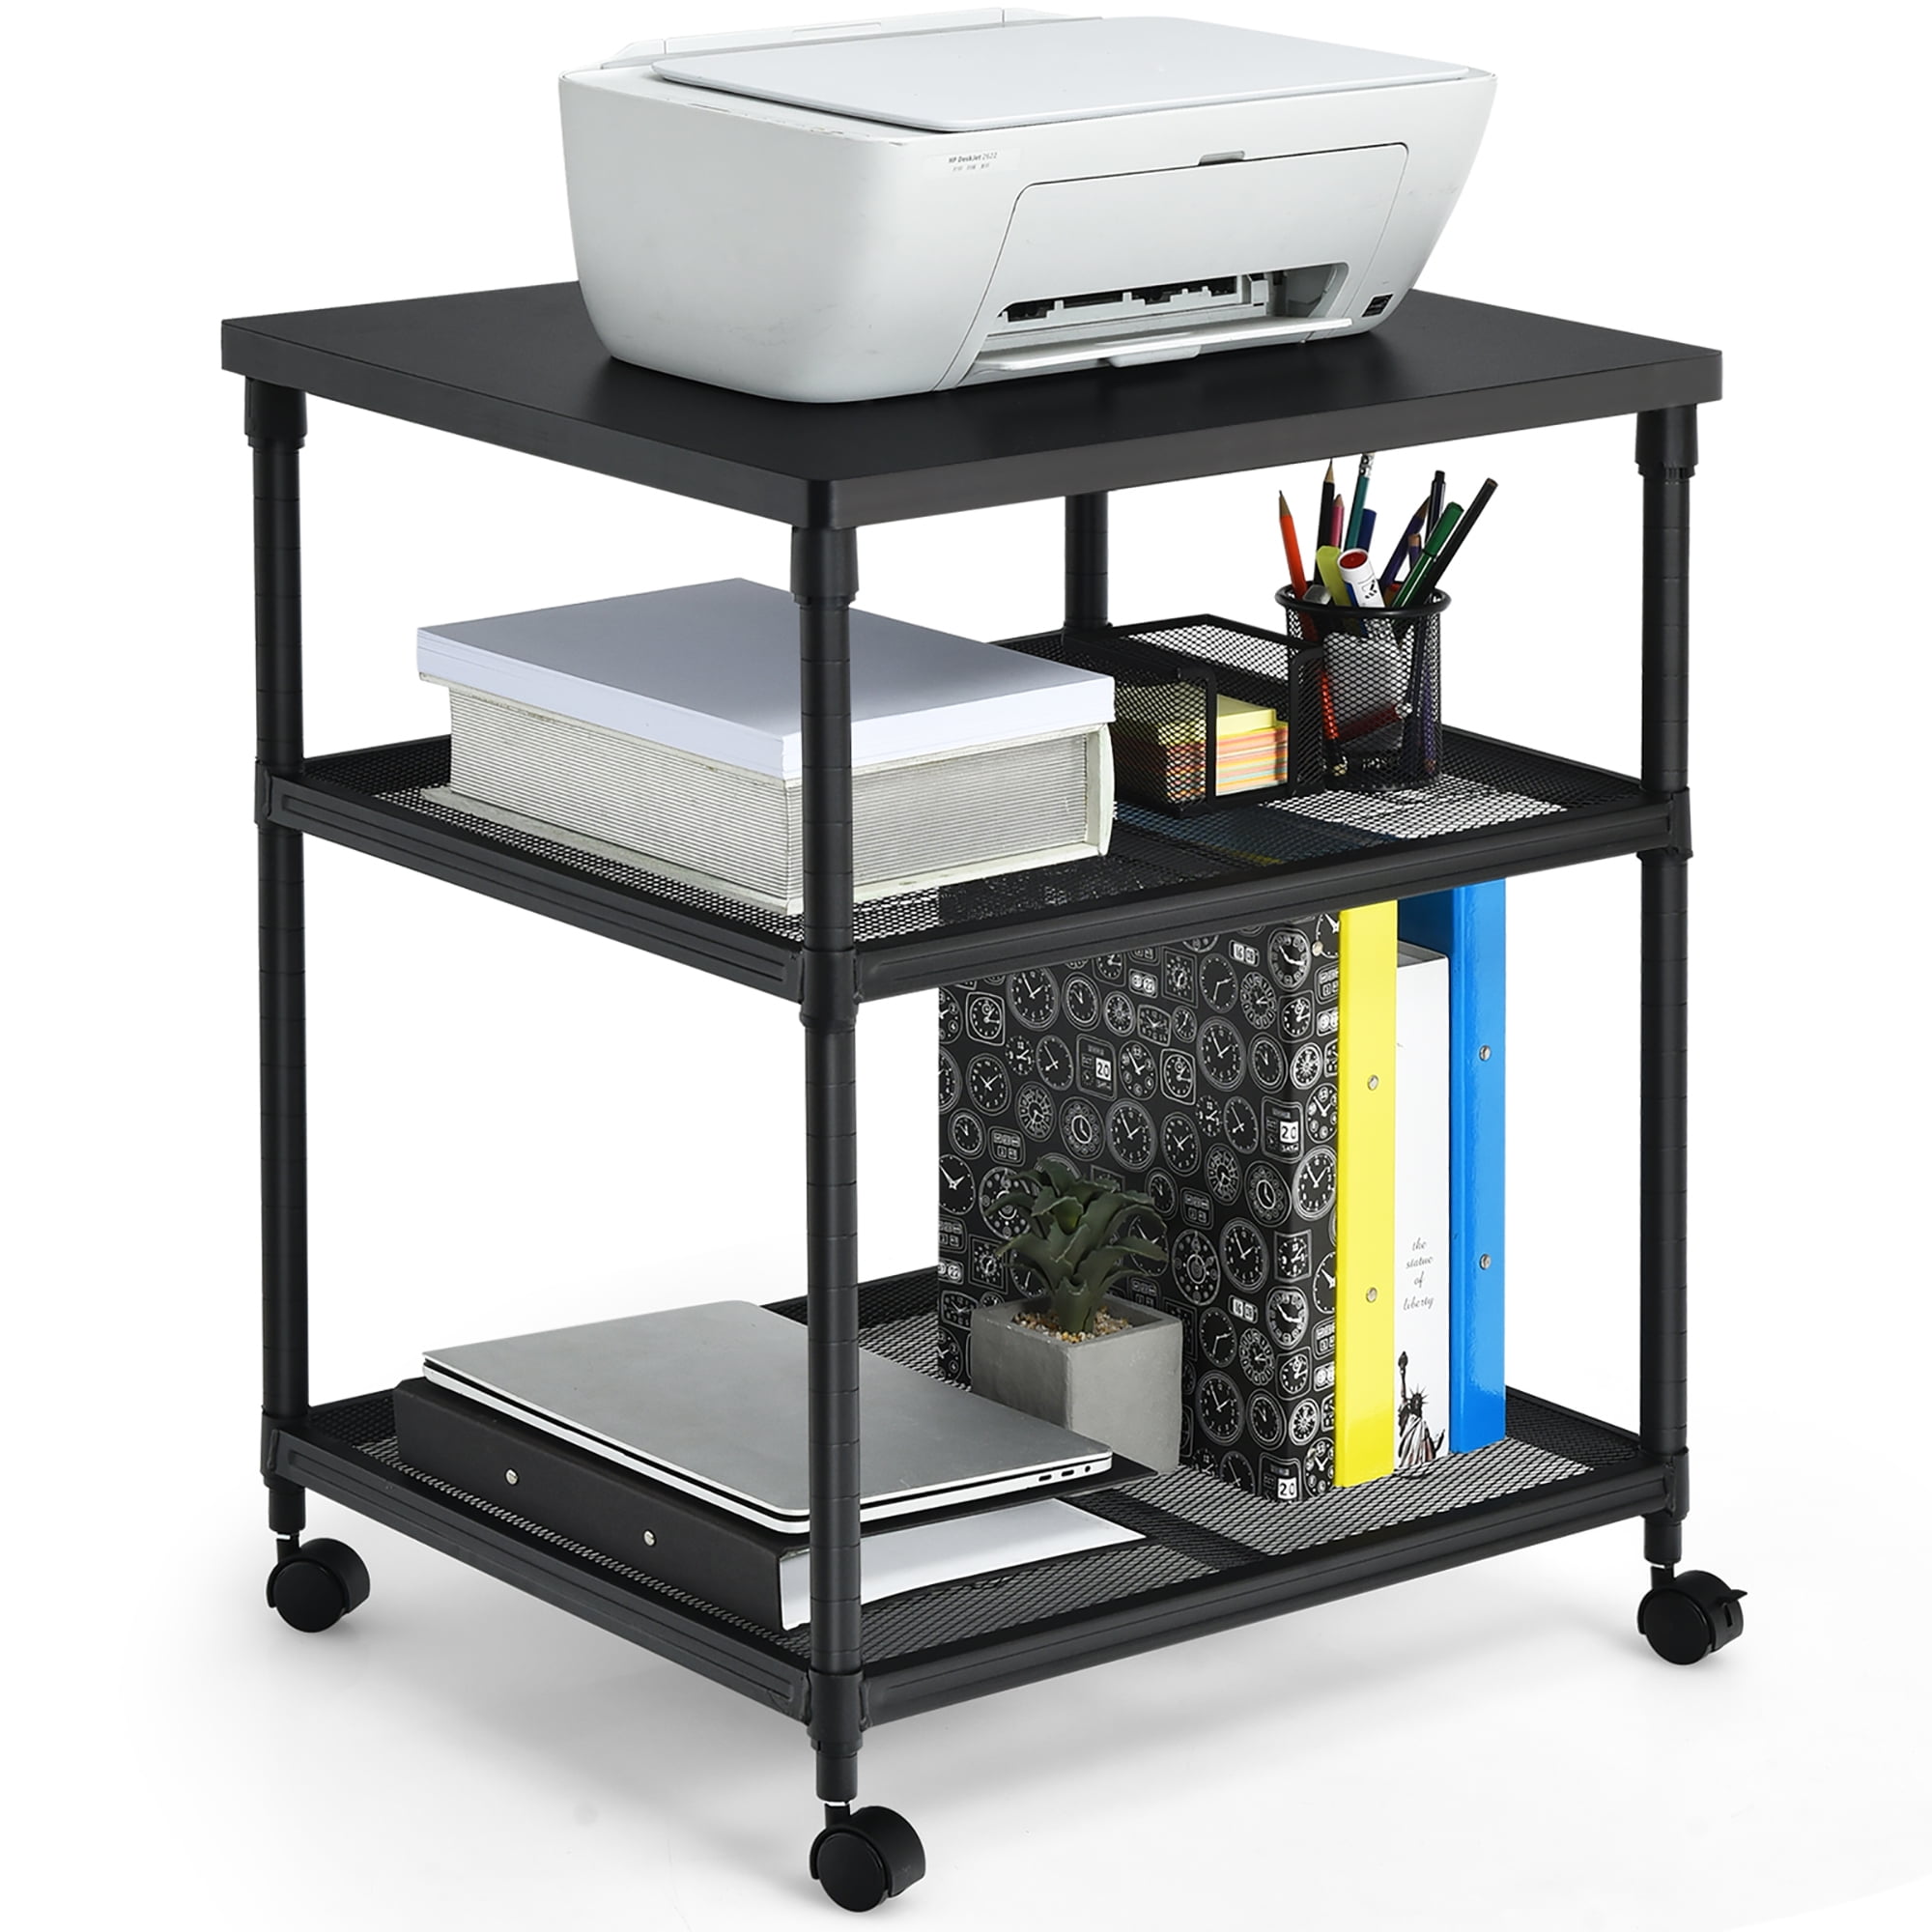 Black Mobile Printer Stand with Storage Drawer and Adjustable Shelf 3 Tier Printer Table Cart on Wheels for Home Office Multifunctional Desk Organizer for Fax Machine Scanner File Folder 